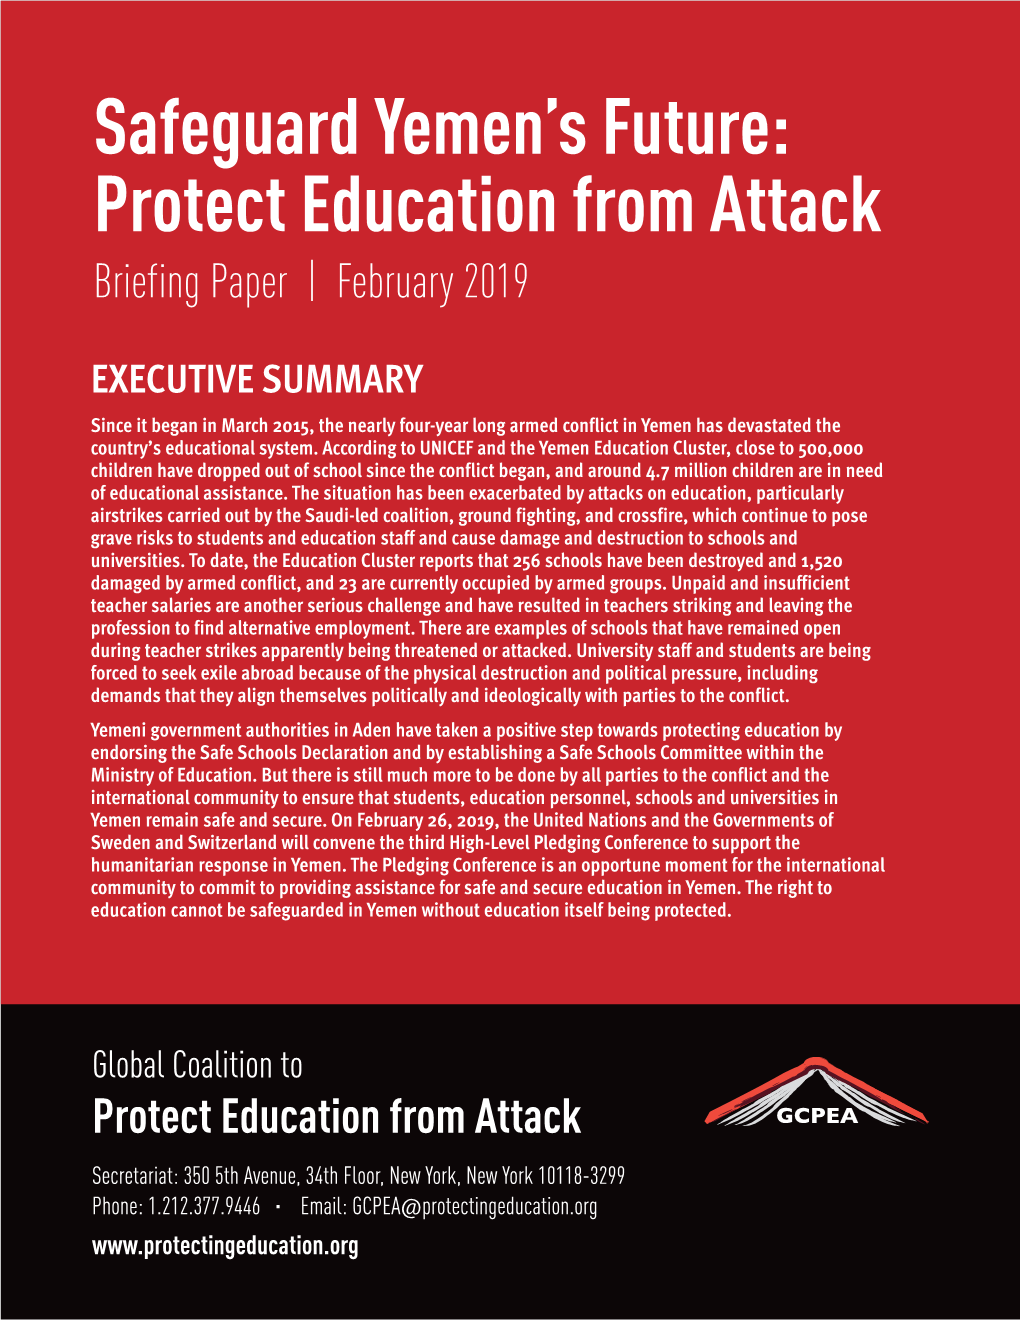 Briefing Paper on Attacks on Education in Yemen